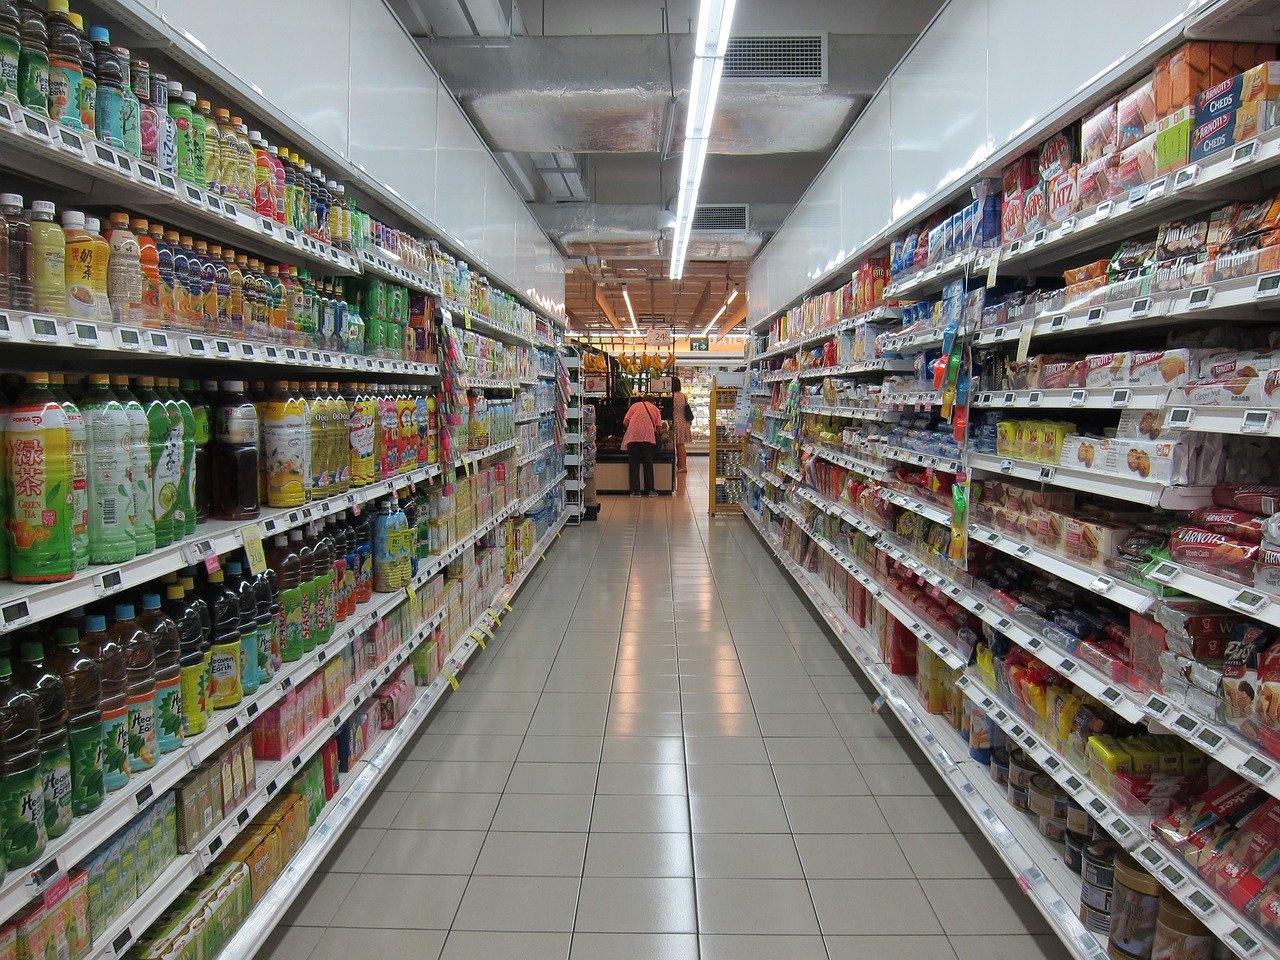 Photo of a grocery store shopping aisle.